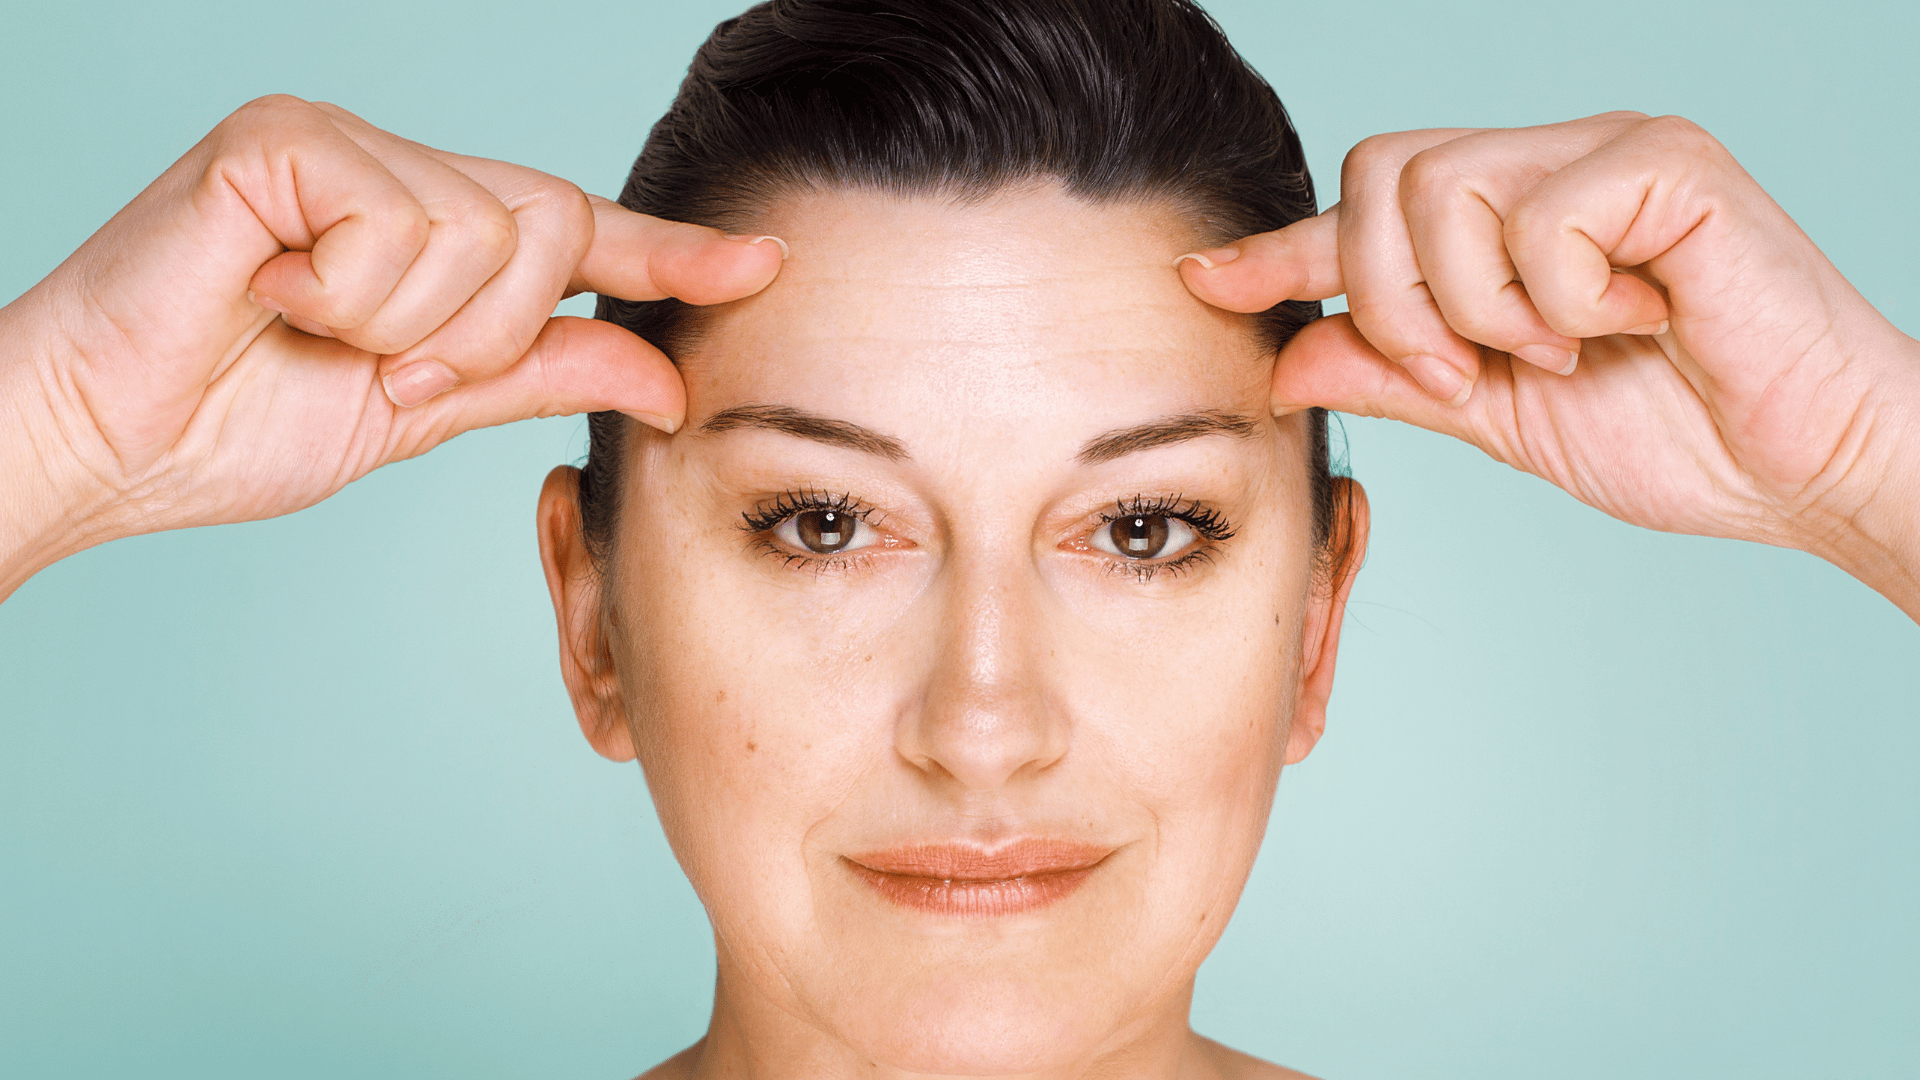 Home remedies to reduce wrinkles